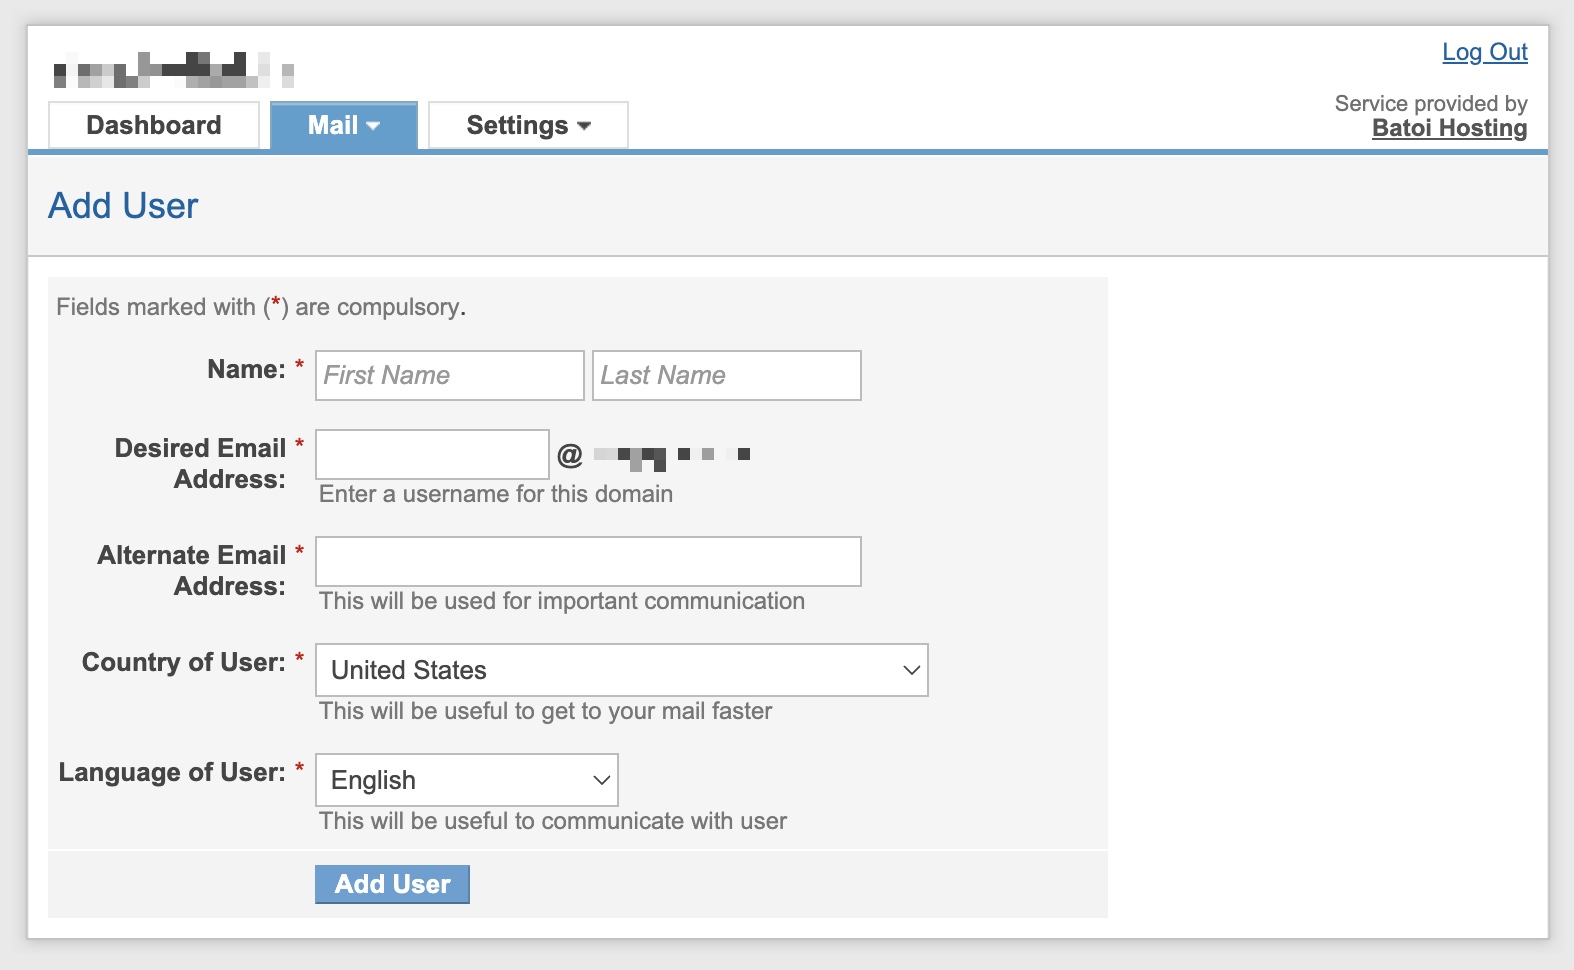 Figure 10: My HostMart Manage Business Email Add User Popup Screen